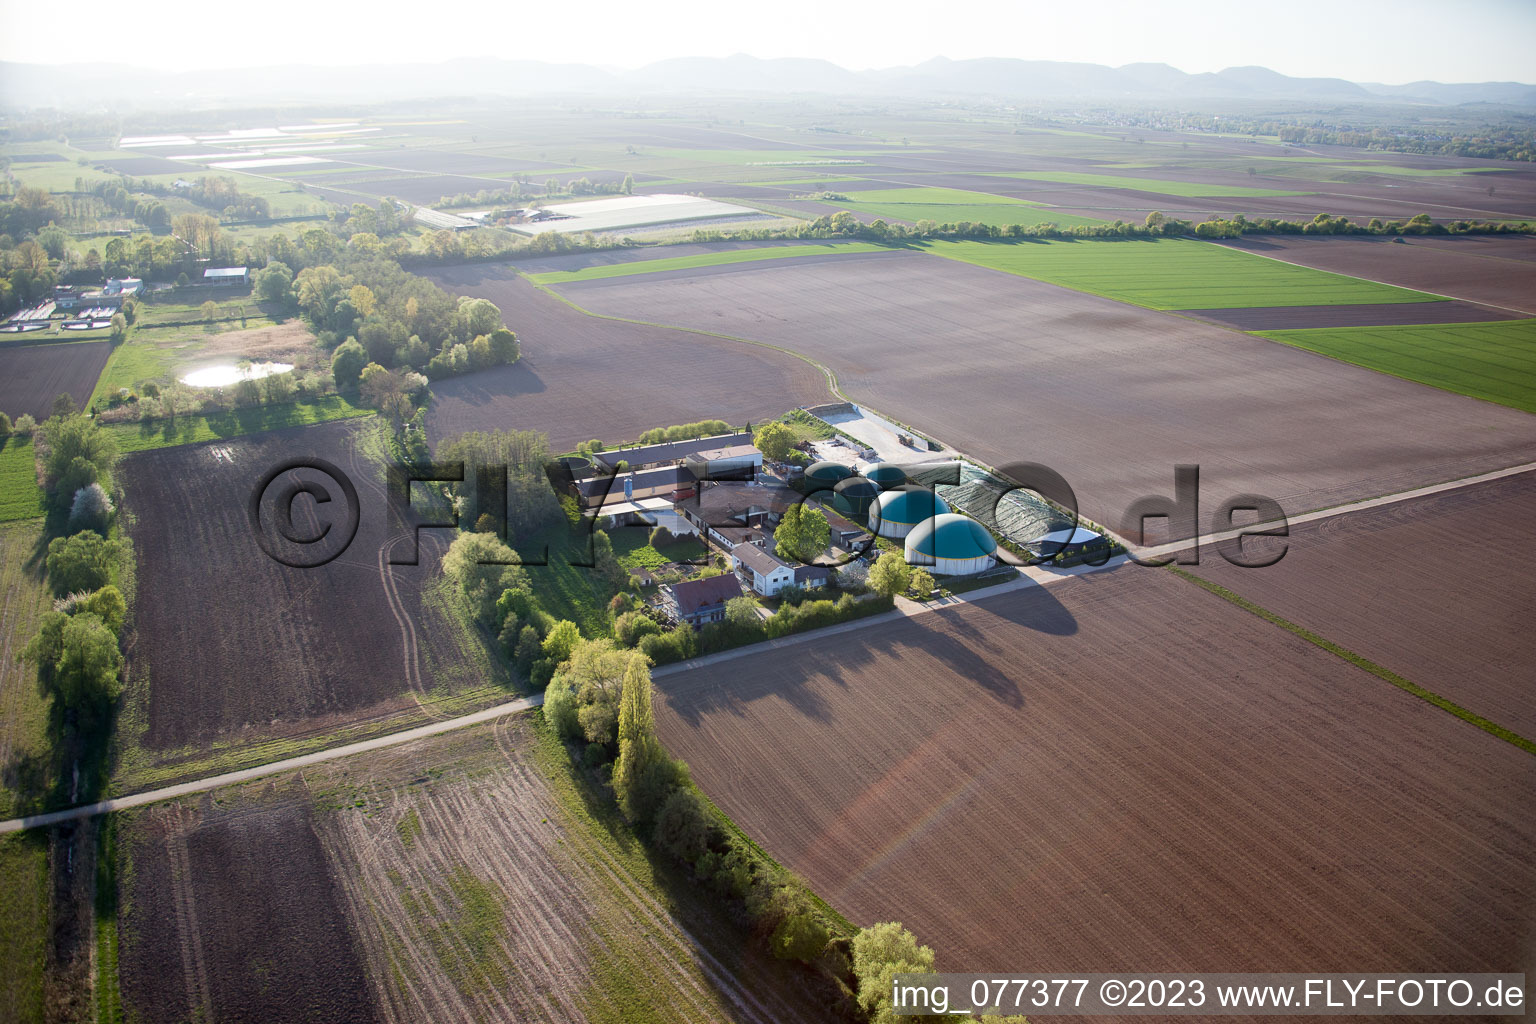 Winden in the state Rhineland-Palatinate, Germany from above